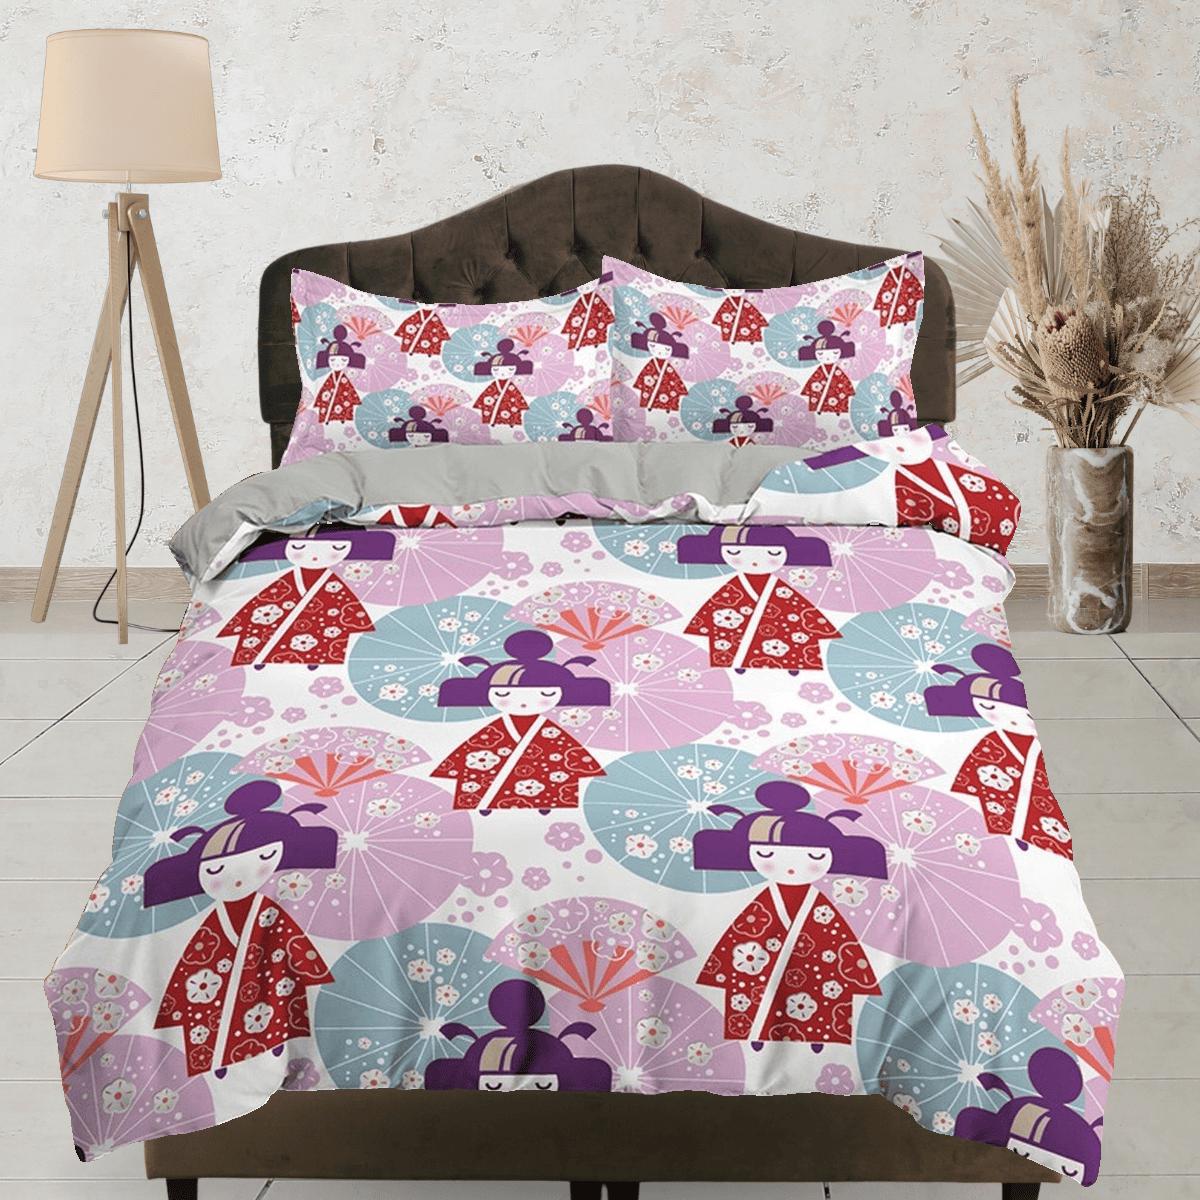 daintyduvet Cute oriental bedding for kids, kawaii geisha in kimono, colorful bedding, japanese duvet cover set for king, queen, full, twin, toddler bed